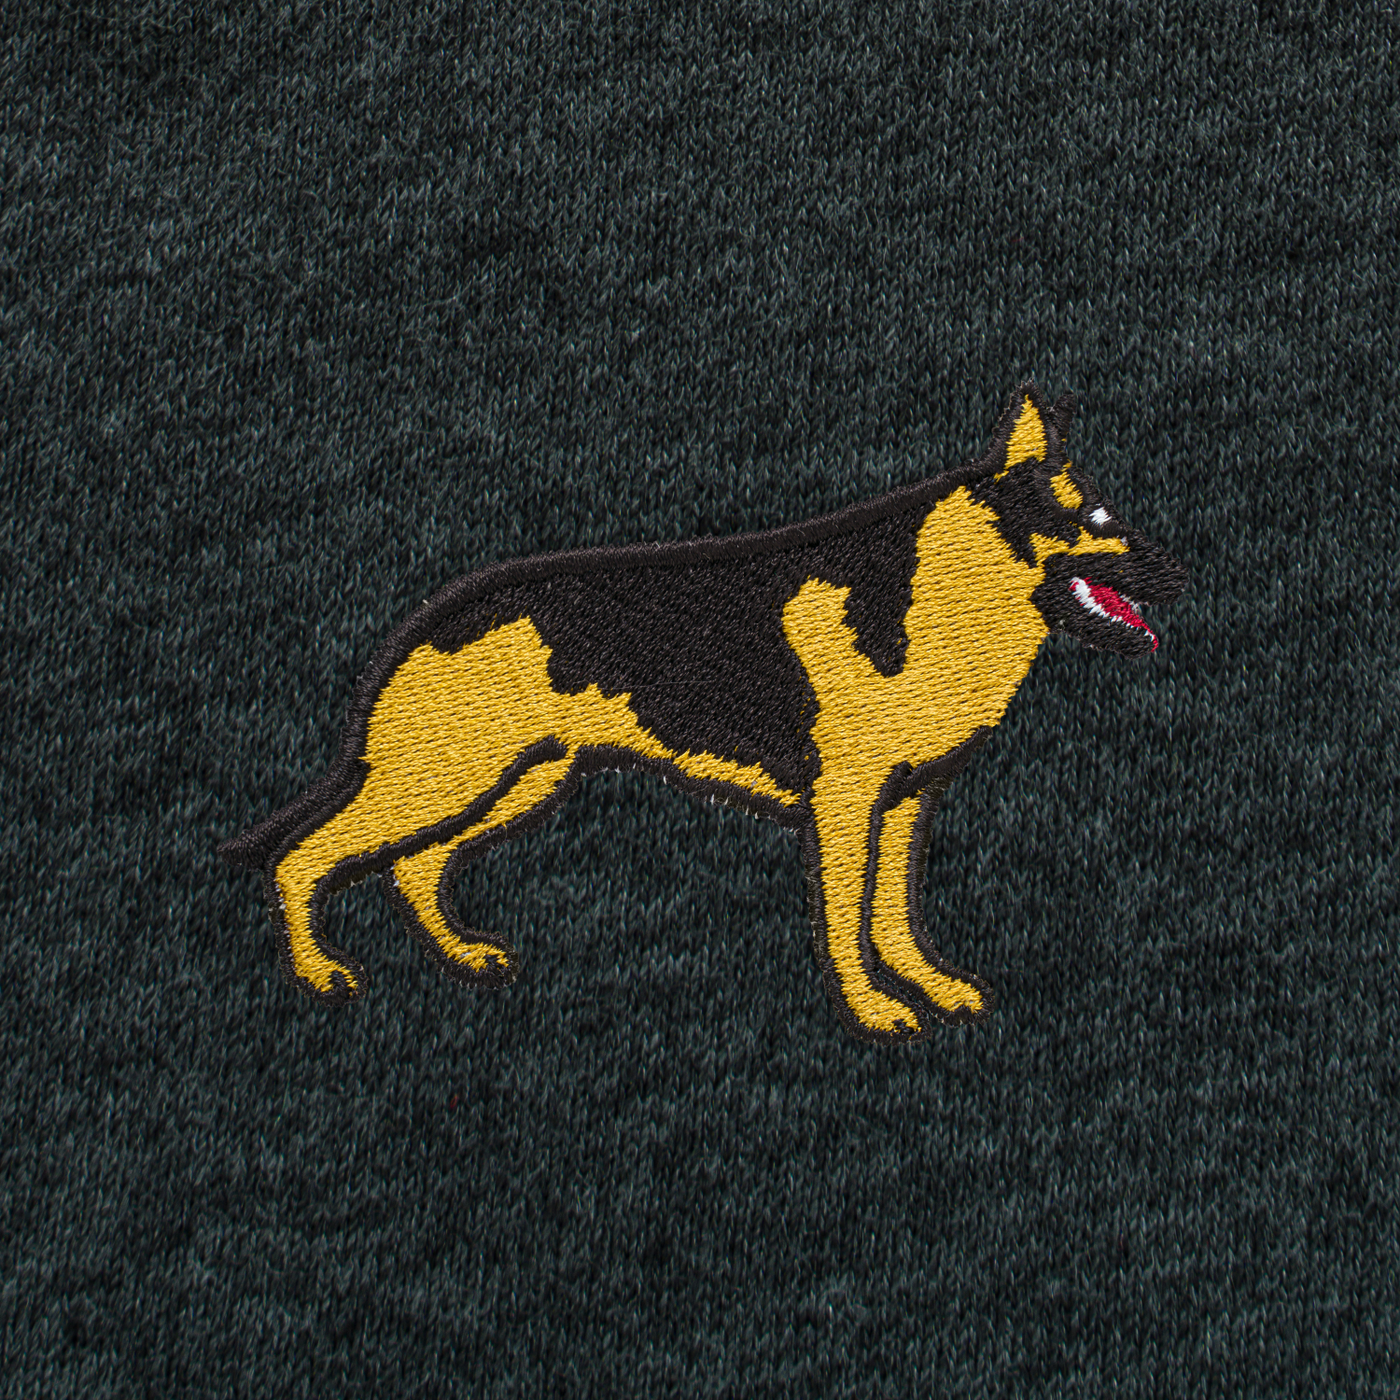 Bobby's Planet Men's Embroidered German Shepherd Long Sleeve Shirt from Paws Dog Cat Animals Collection in Dark Grey Heather Color#color_dark-grey-heather